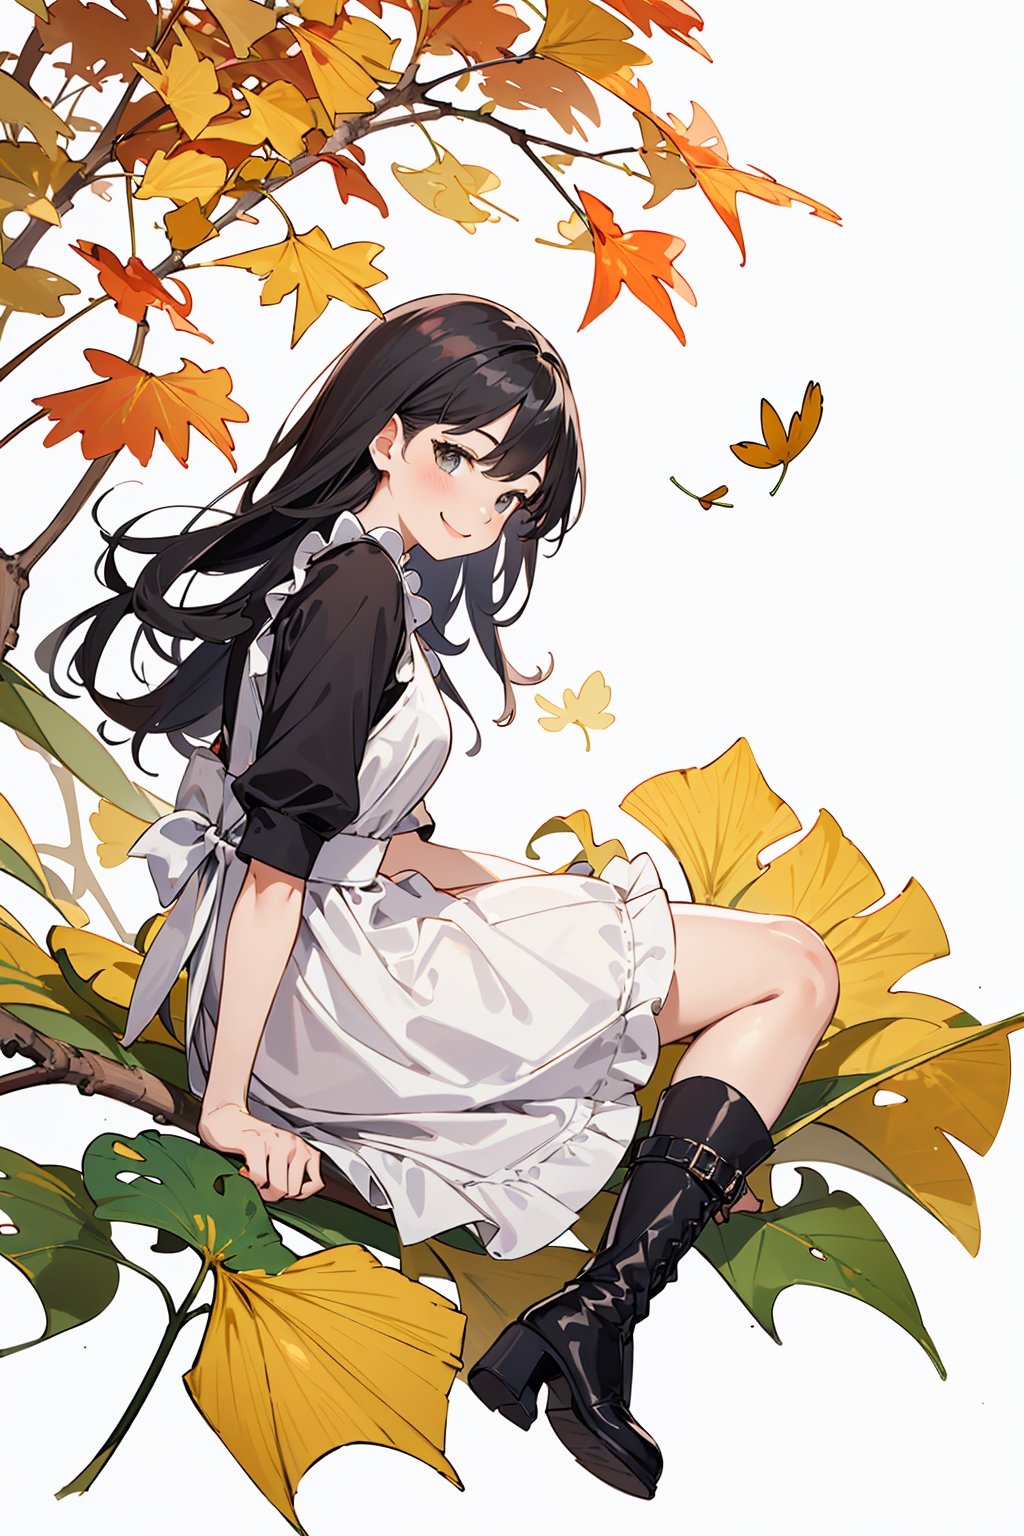 ((Botanical art white background:1.3)),1 girl,from side,dynamic pose, sitting, chubby, long hair, maid dress, boots, smile, autumn, lots of maple leaves and ginkgo trees with red leaves